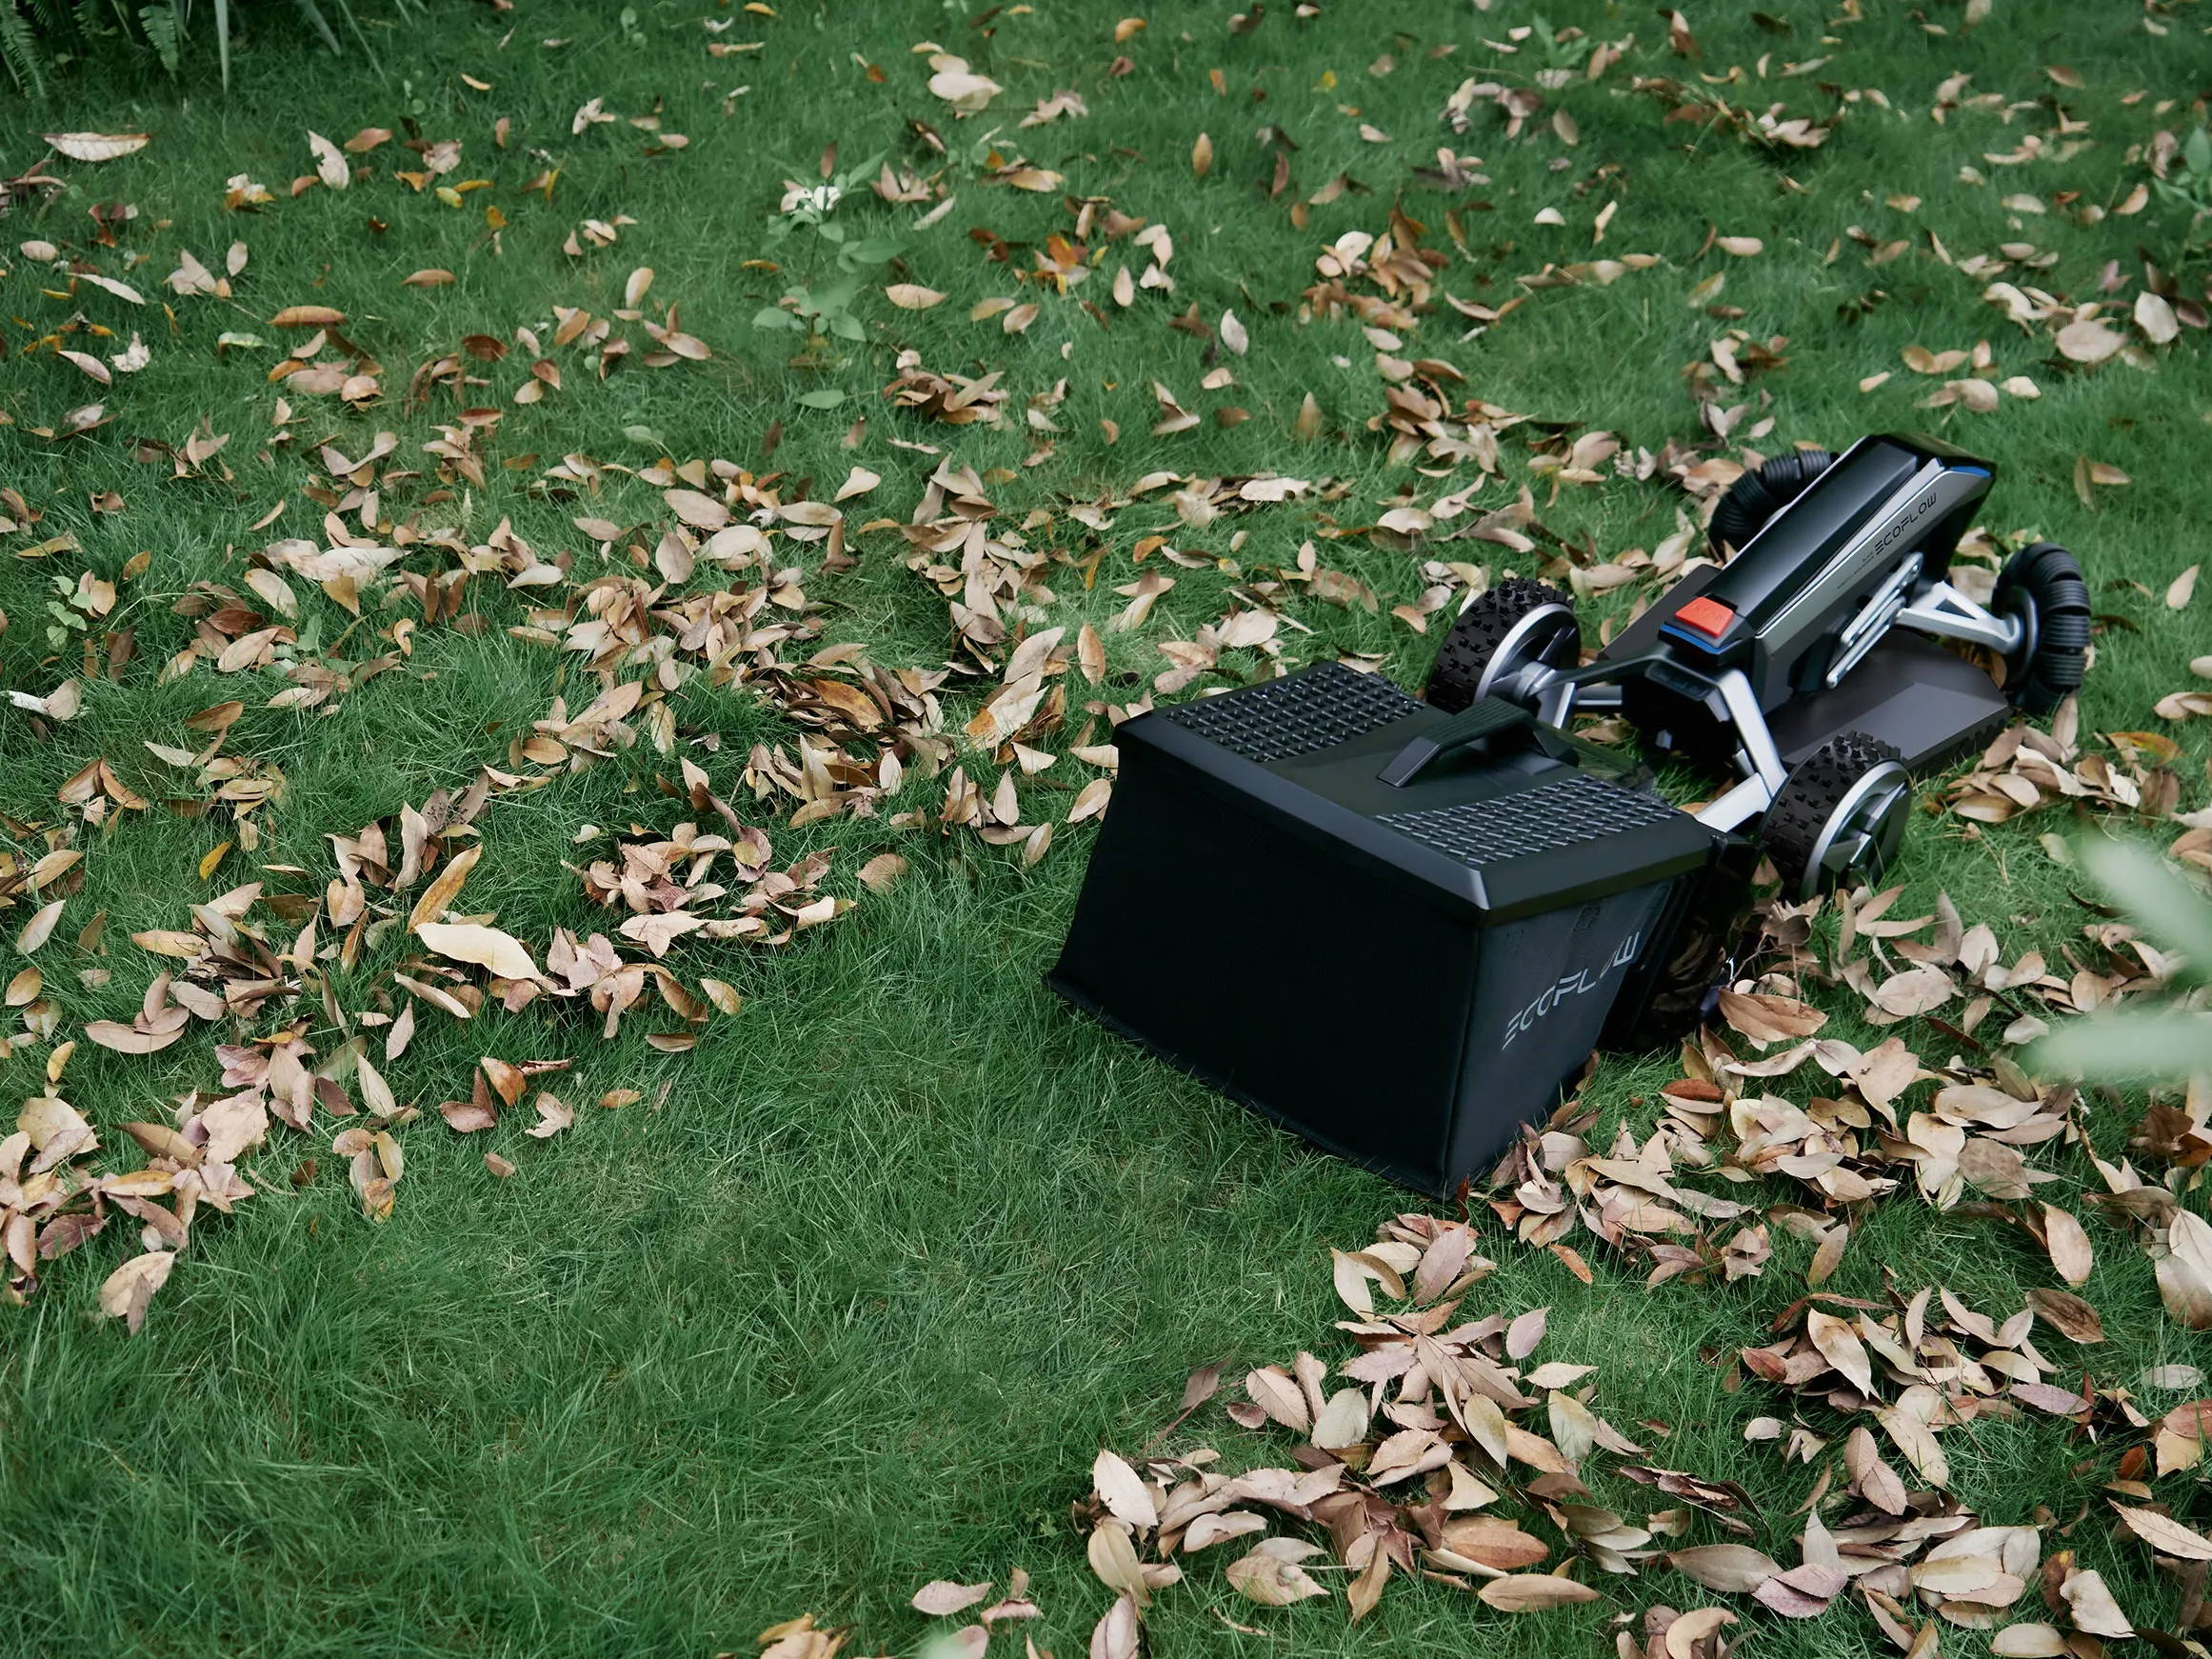 THE BEST ROBOTIC LAWNMOWER FOR 2023